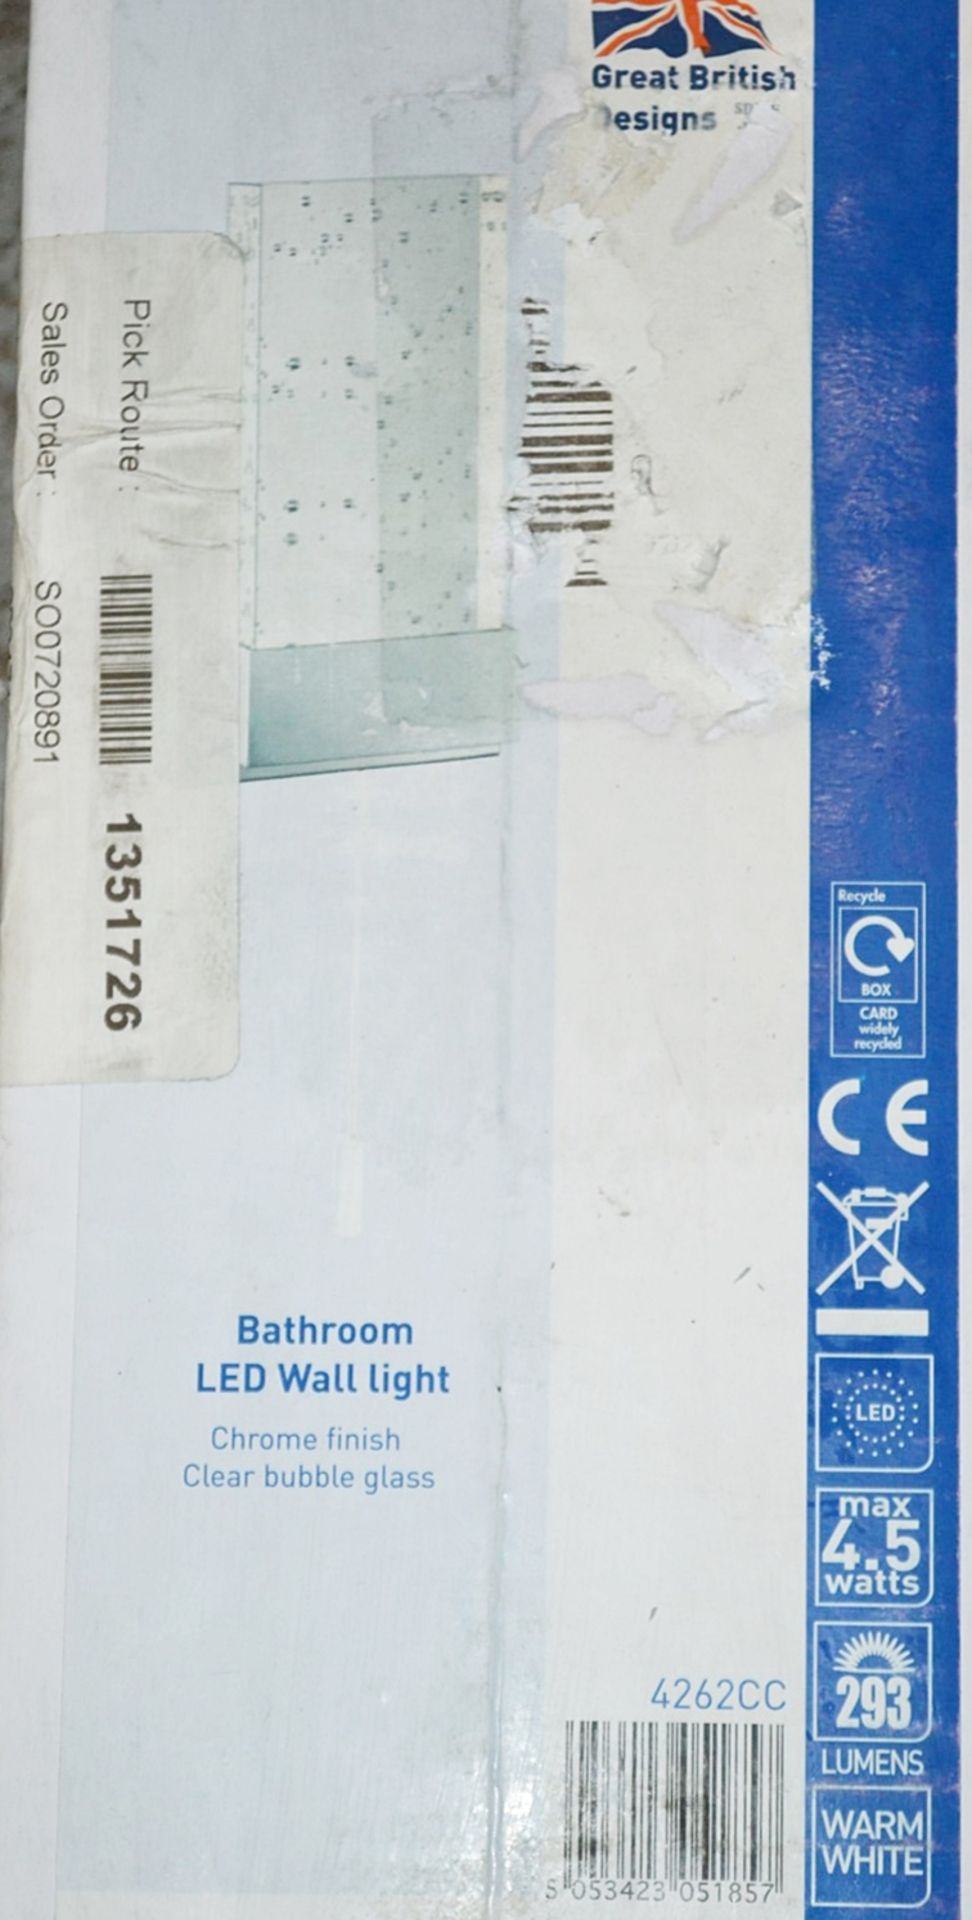 1 x Searchlight LED Bathroom Wall Light - Brand New and Boxed - 4262CC - Ref: P - CL323 - Location: